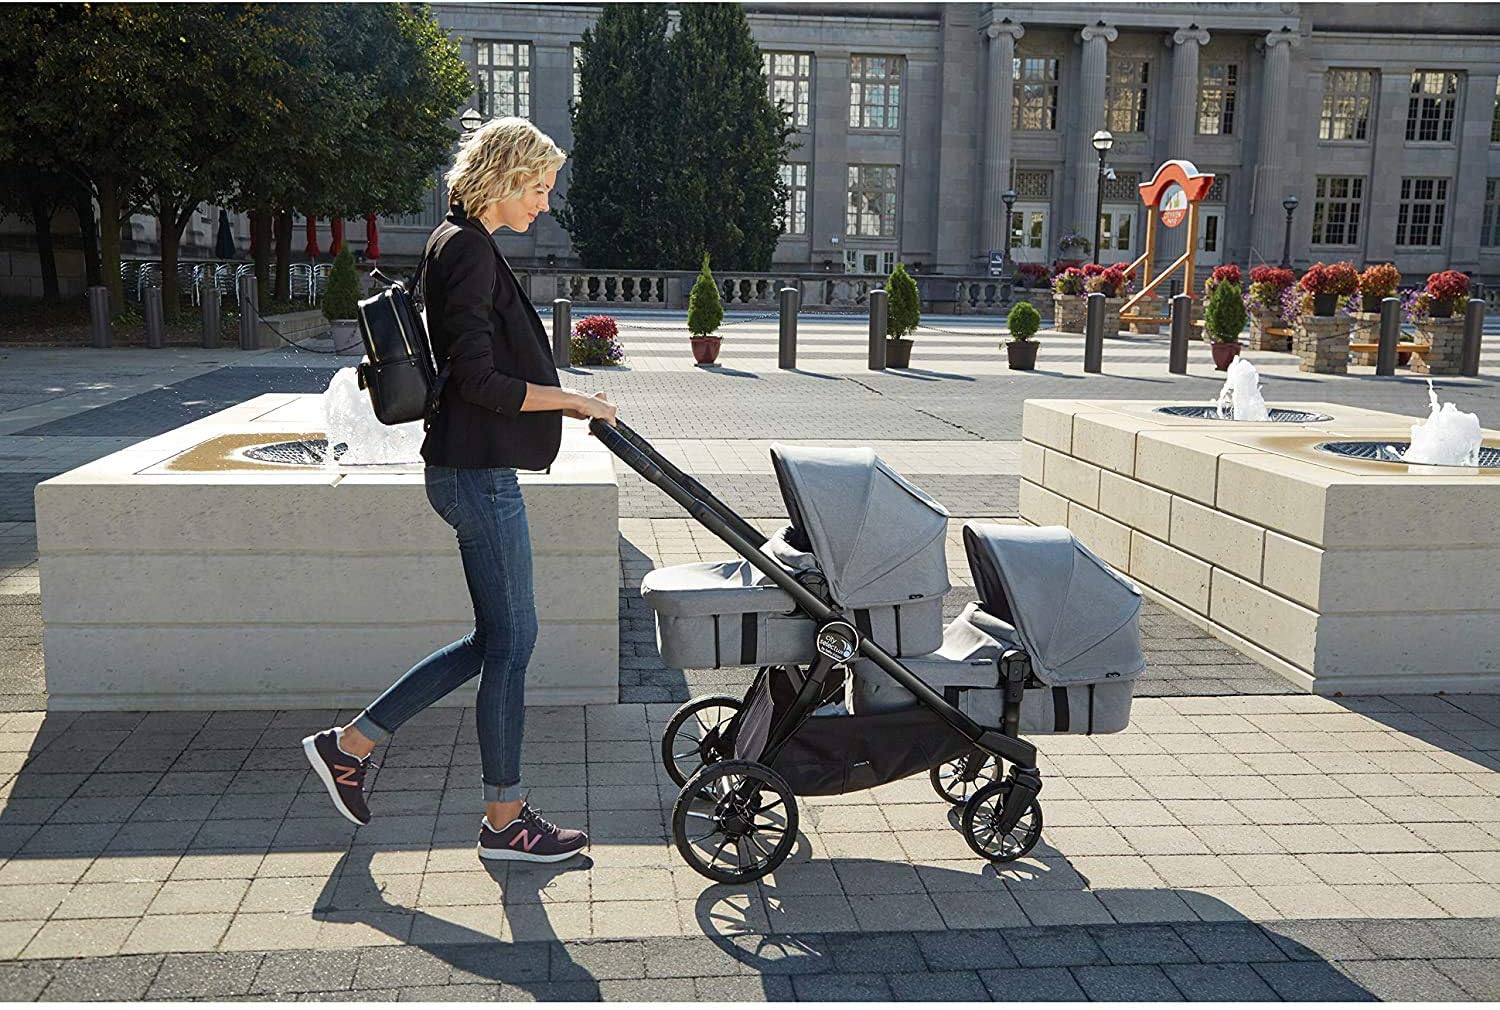 Baby Jogger City Select LUX Slate